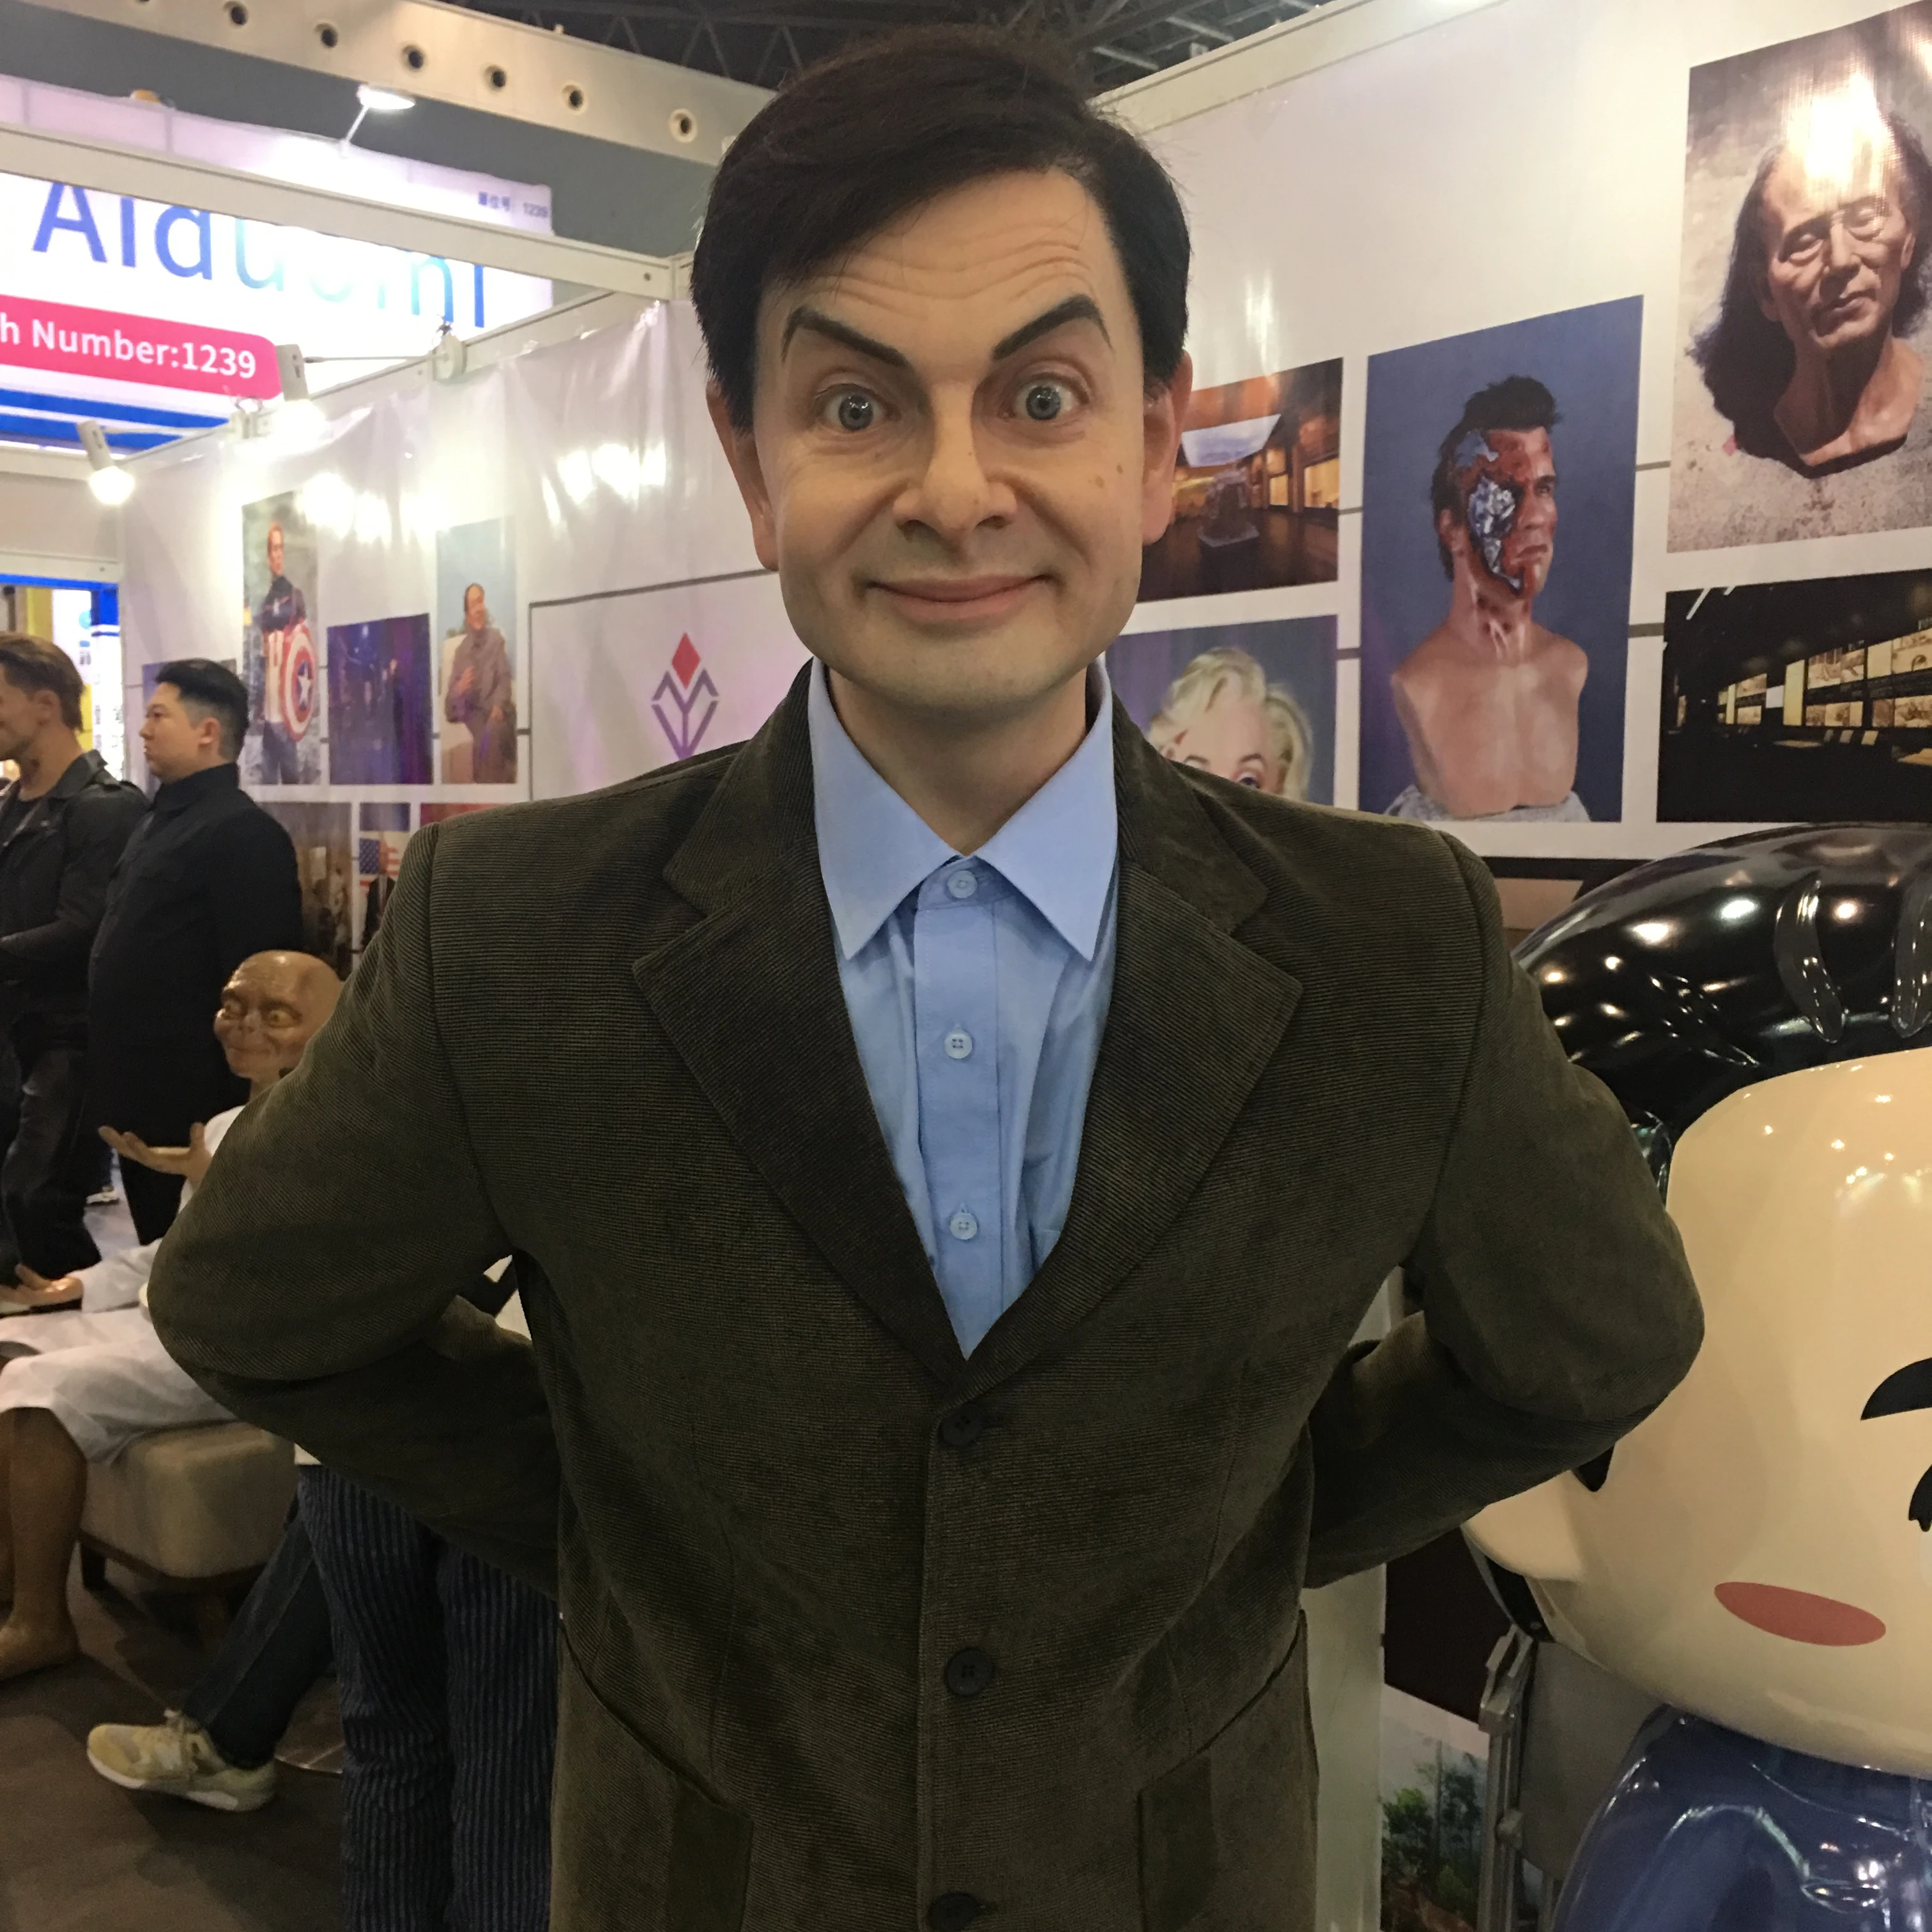 Realistic sculpture Vivid great funny comedy man Lifesize Wax silicone Figure of Mr.Bean Statue